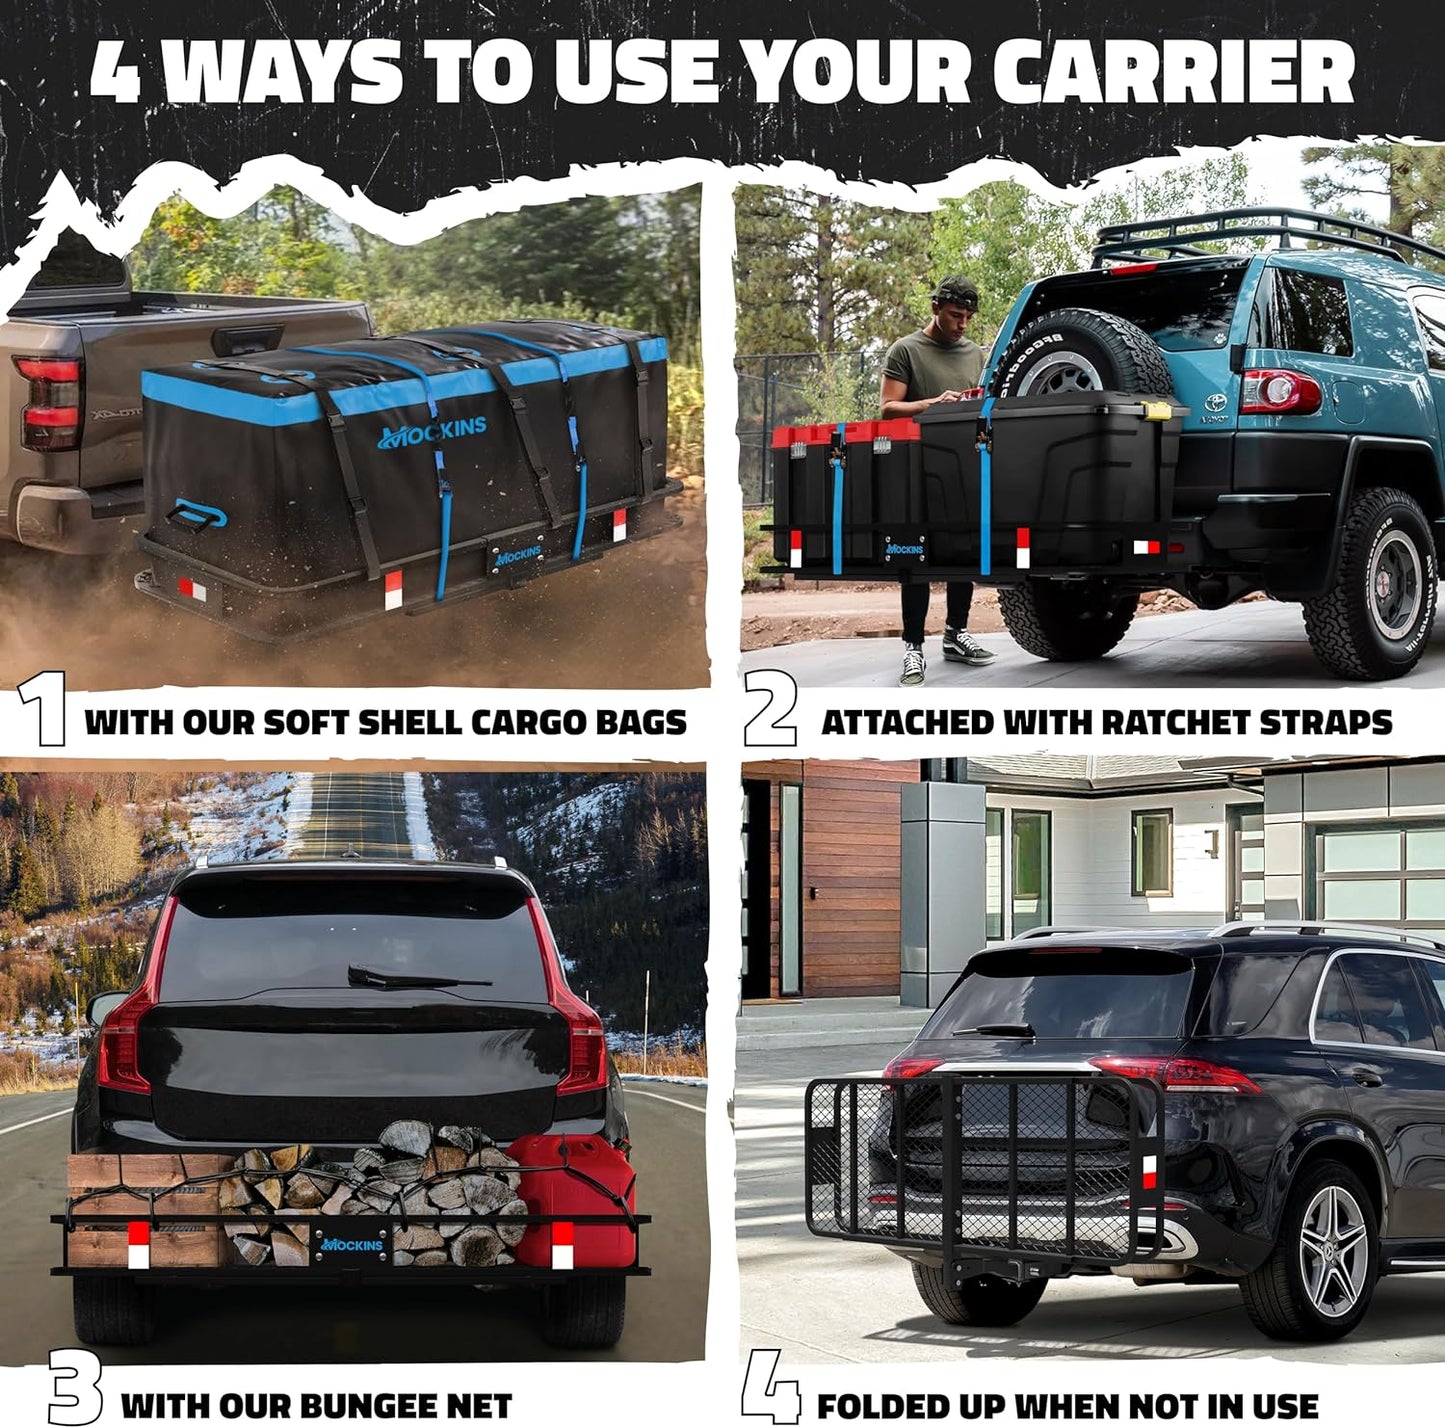 60" X 20" X 6" Folding Cargo Carrier Trailer Hitch,16 Cubic Ft Vehicle Soft-Shell Carriers Bag 29" X 19" X 12", 500lb capacity